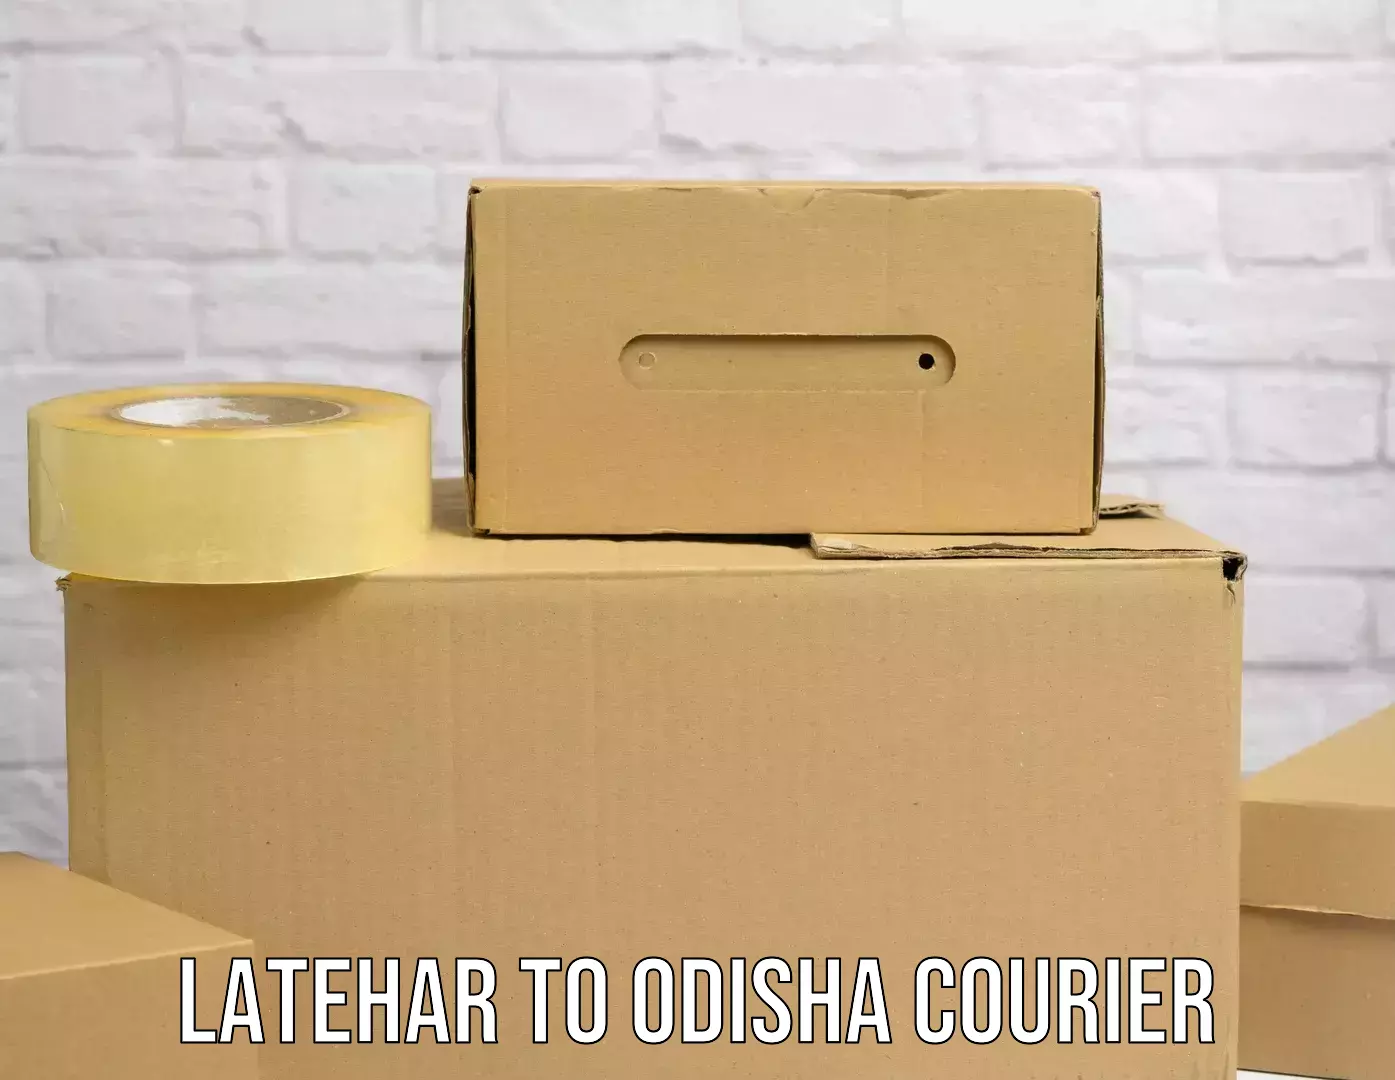 On-call courier service Latehar to Jagatpur